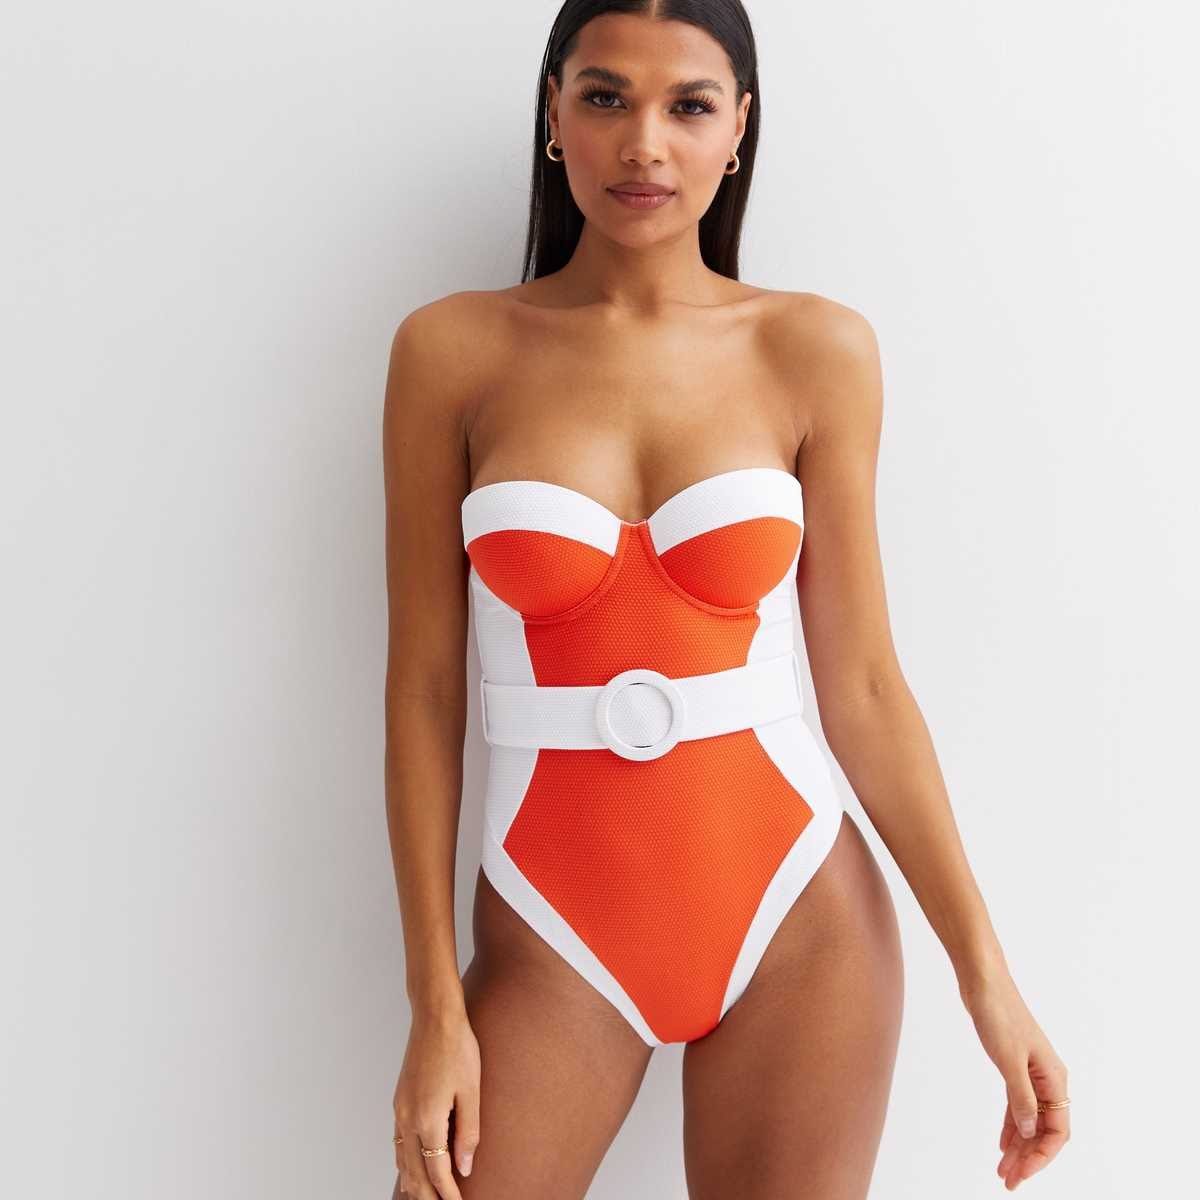 Red Belted Illusion Lift & Shape Swimsuit, €39.99, New Look